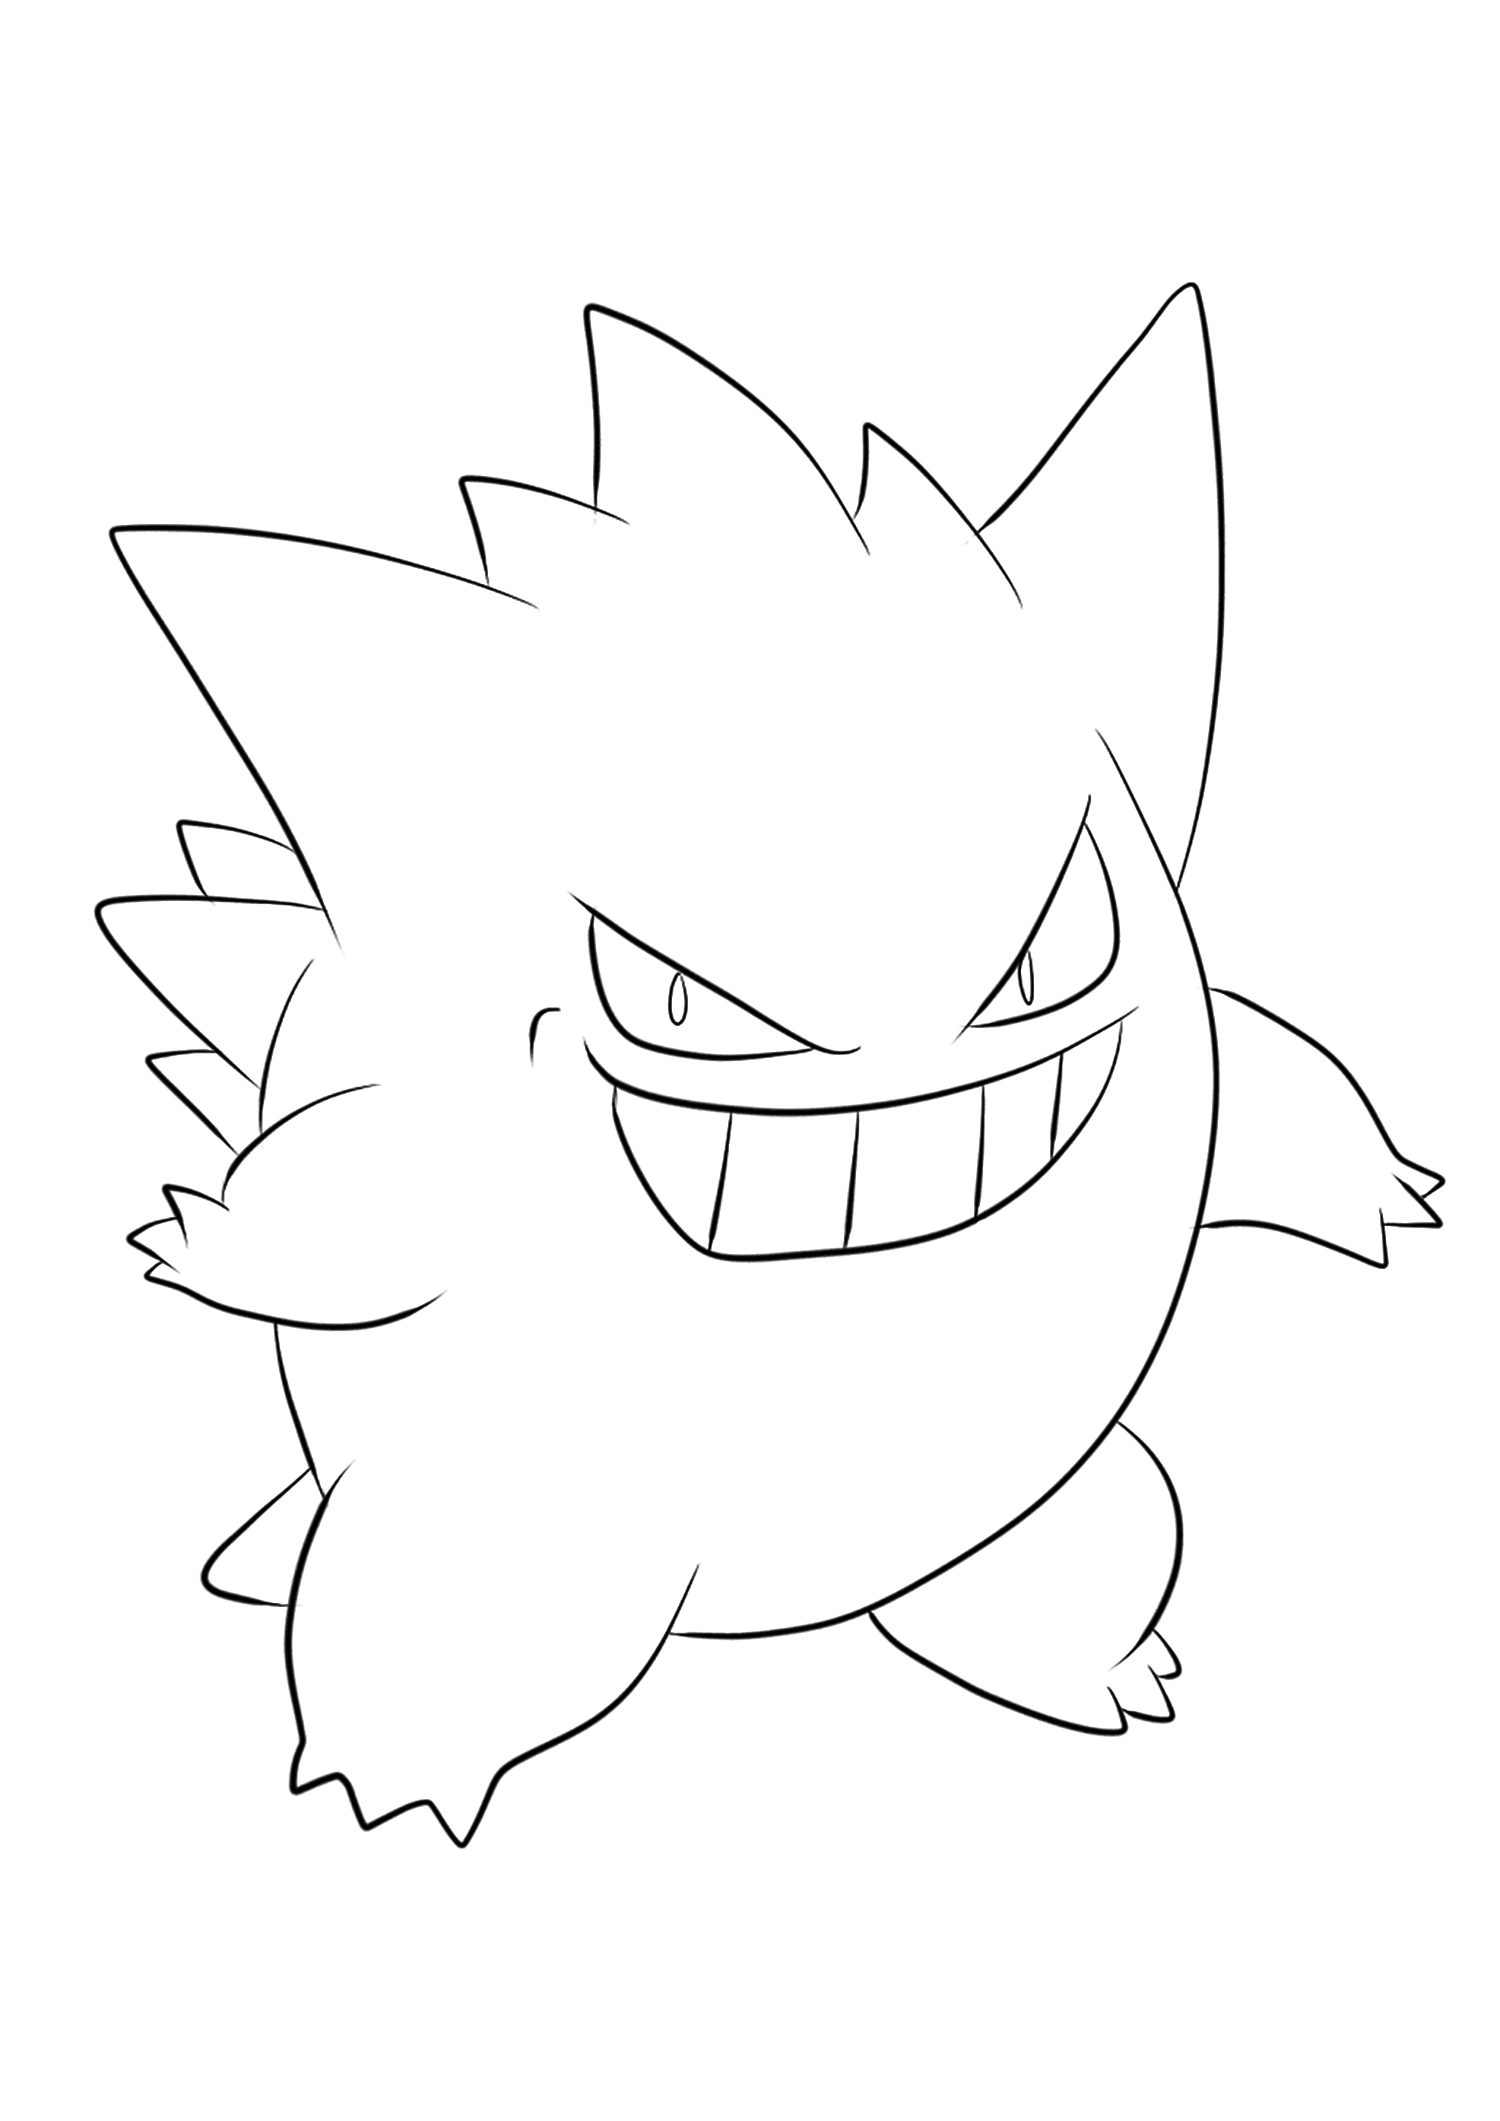 Gengar (No.94)Gengar Coloring page, Generation I Pokemon of type Ghost and PoisonOriginal image credit: Pokemon linearts by Lilly Gerbil on Deviantart.Permission:  All rights reserved © Pokemon company and Ken Sugimori.